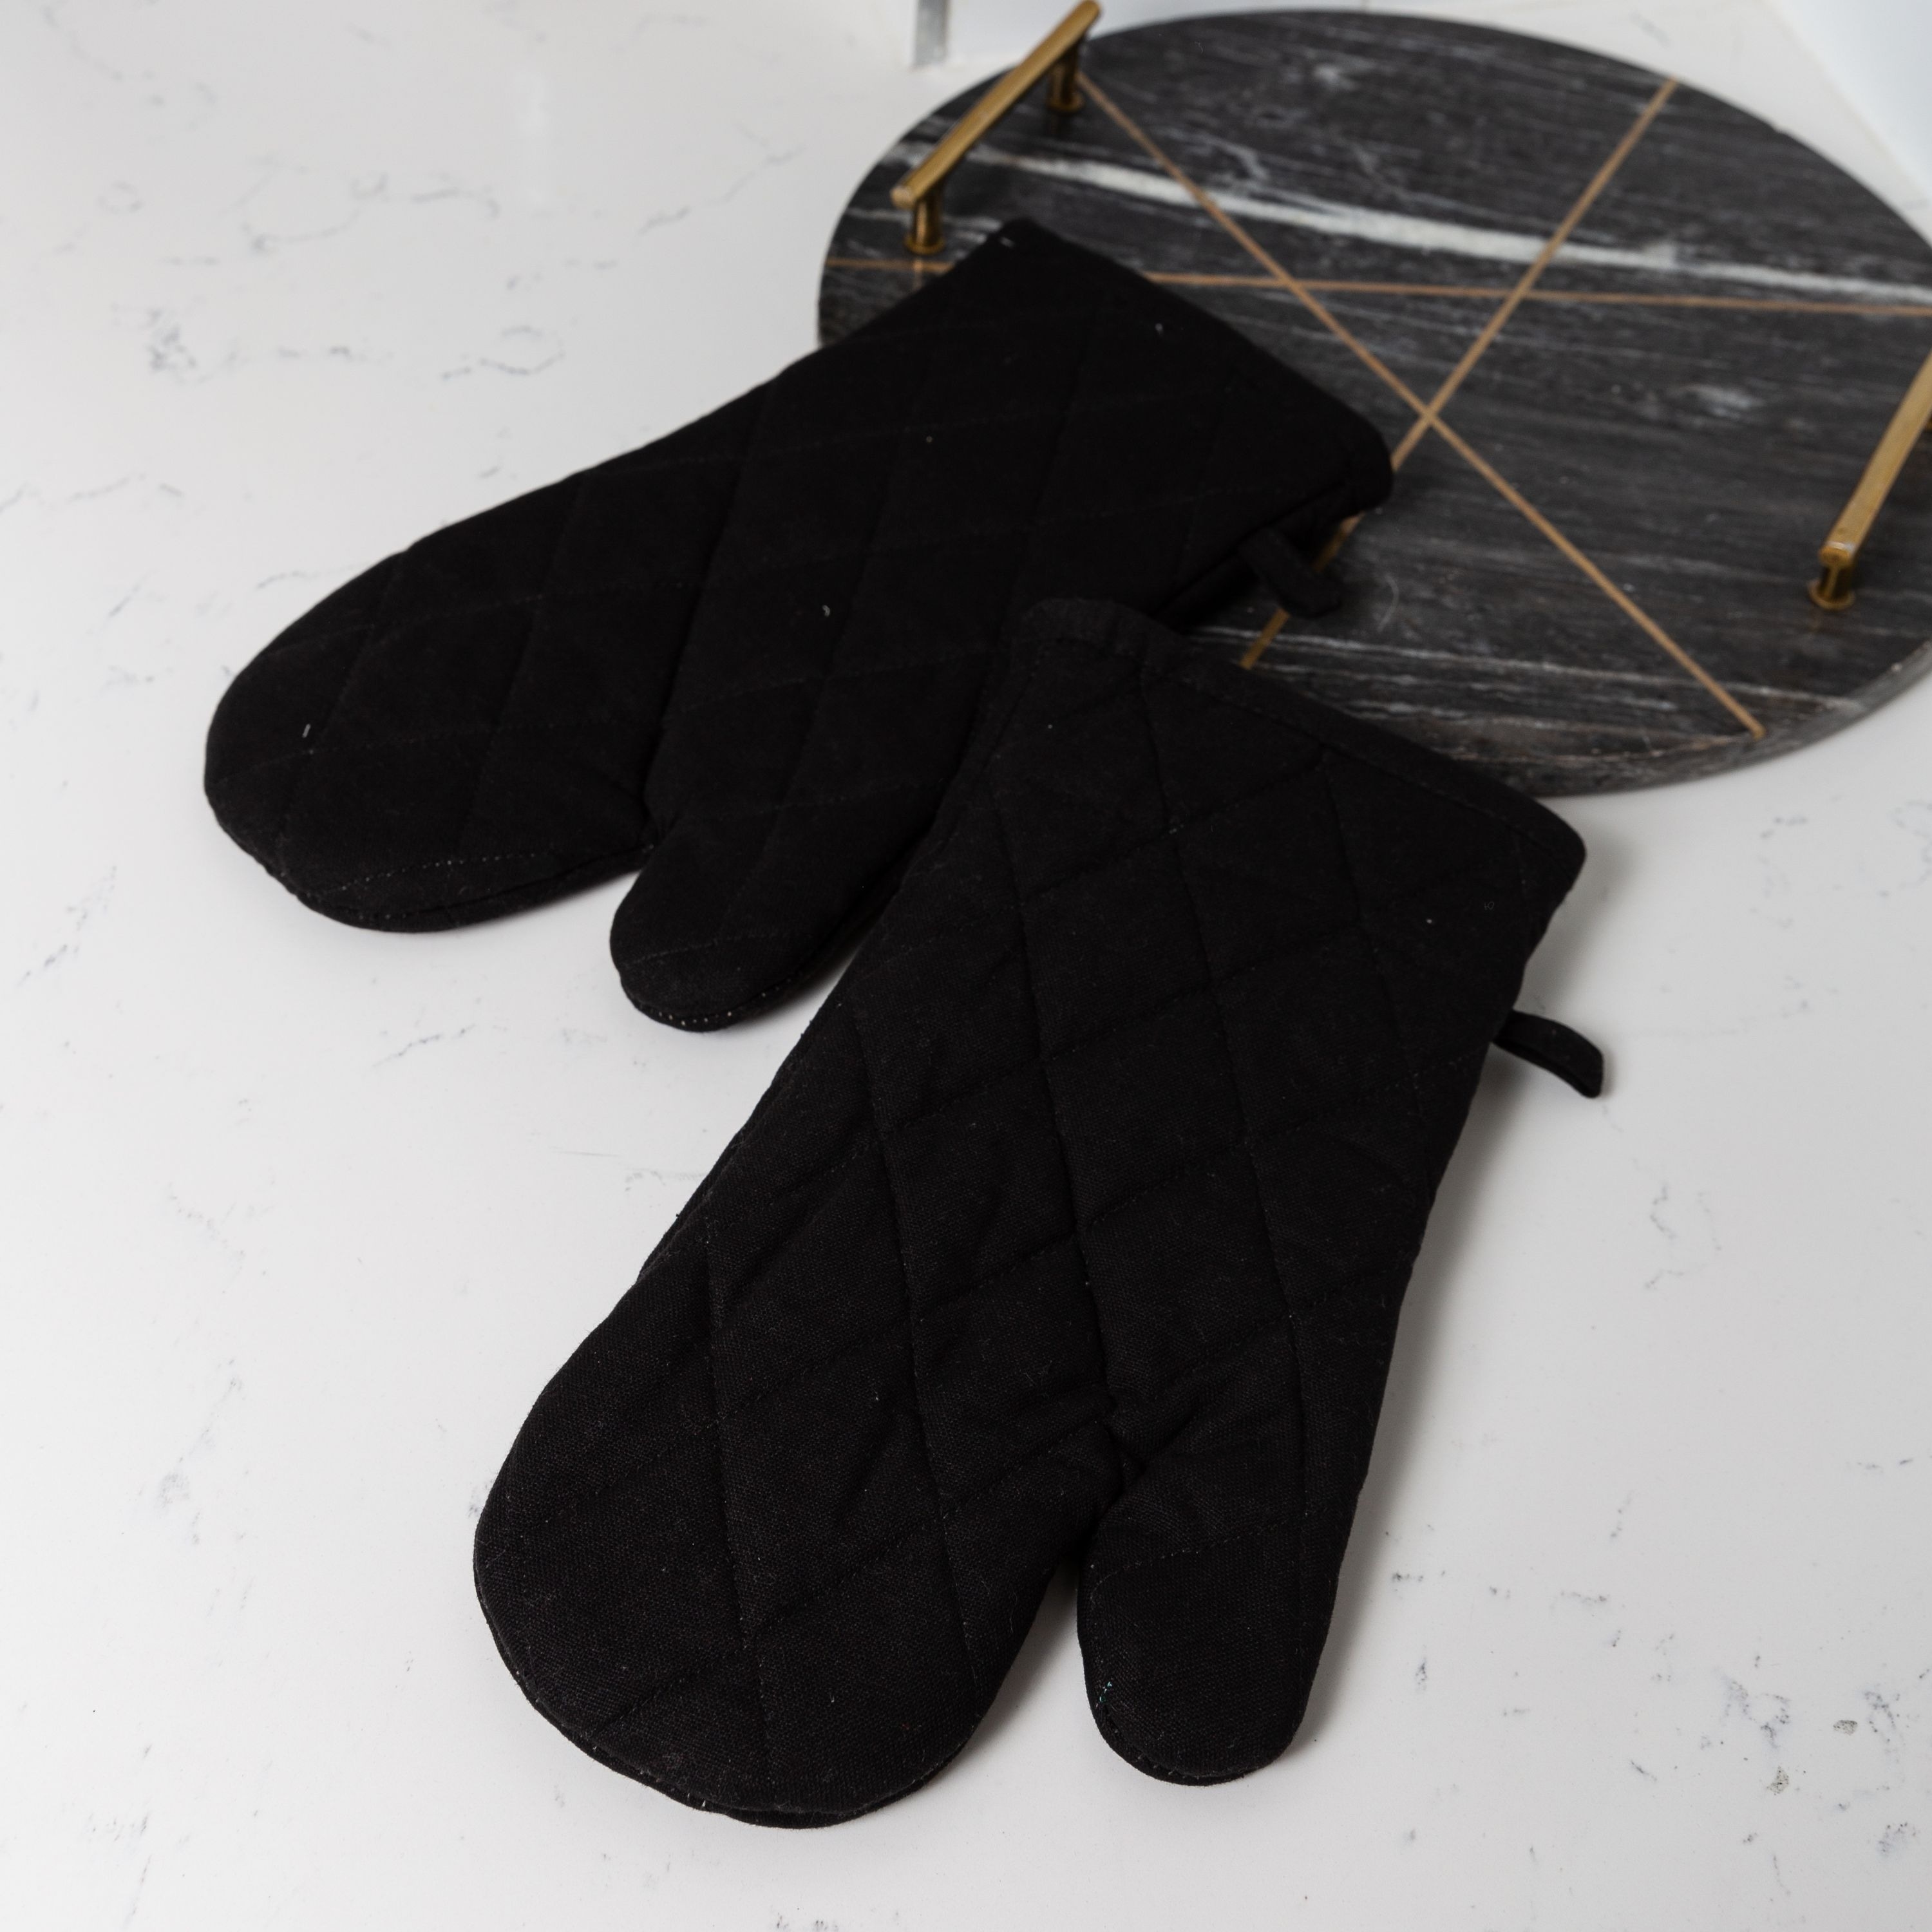 https://ak1.ostkcdn.com/images/products/is/images/direct/a573e4633fcd0262a48b21a38ad0b619832df458/Fabstyles-Solo-Waffle-Cotton-Oven-Mitt-Set-of-2.jpg